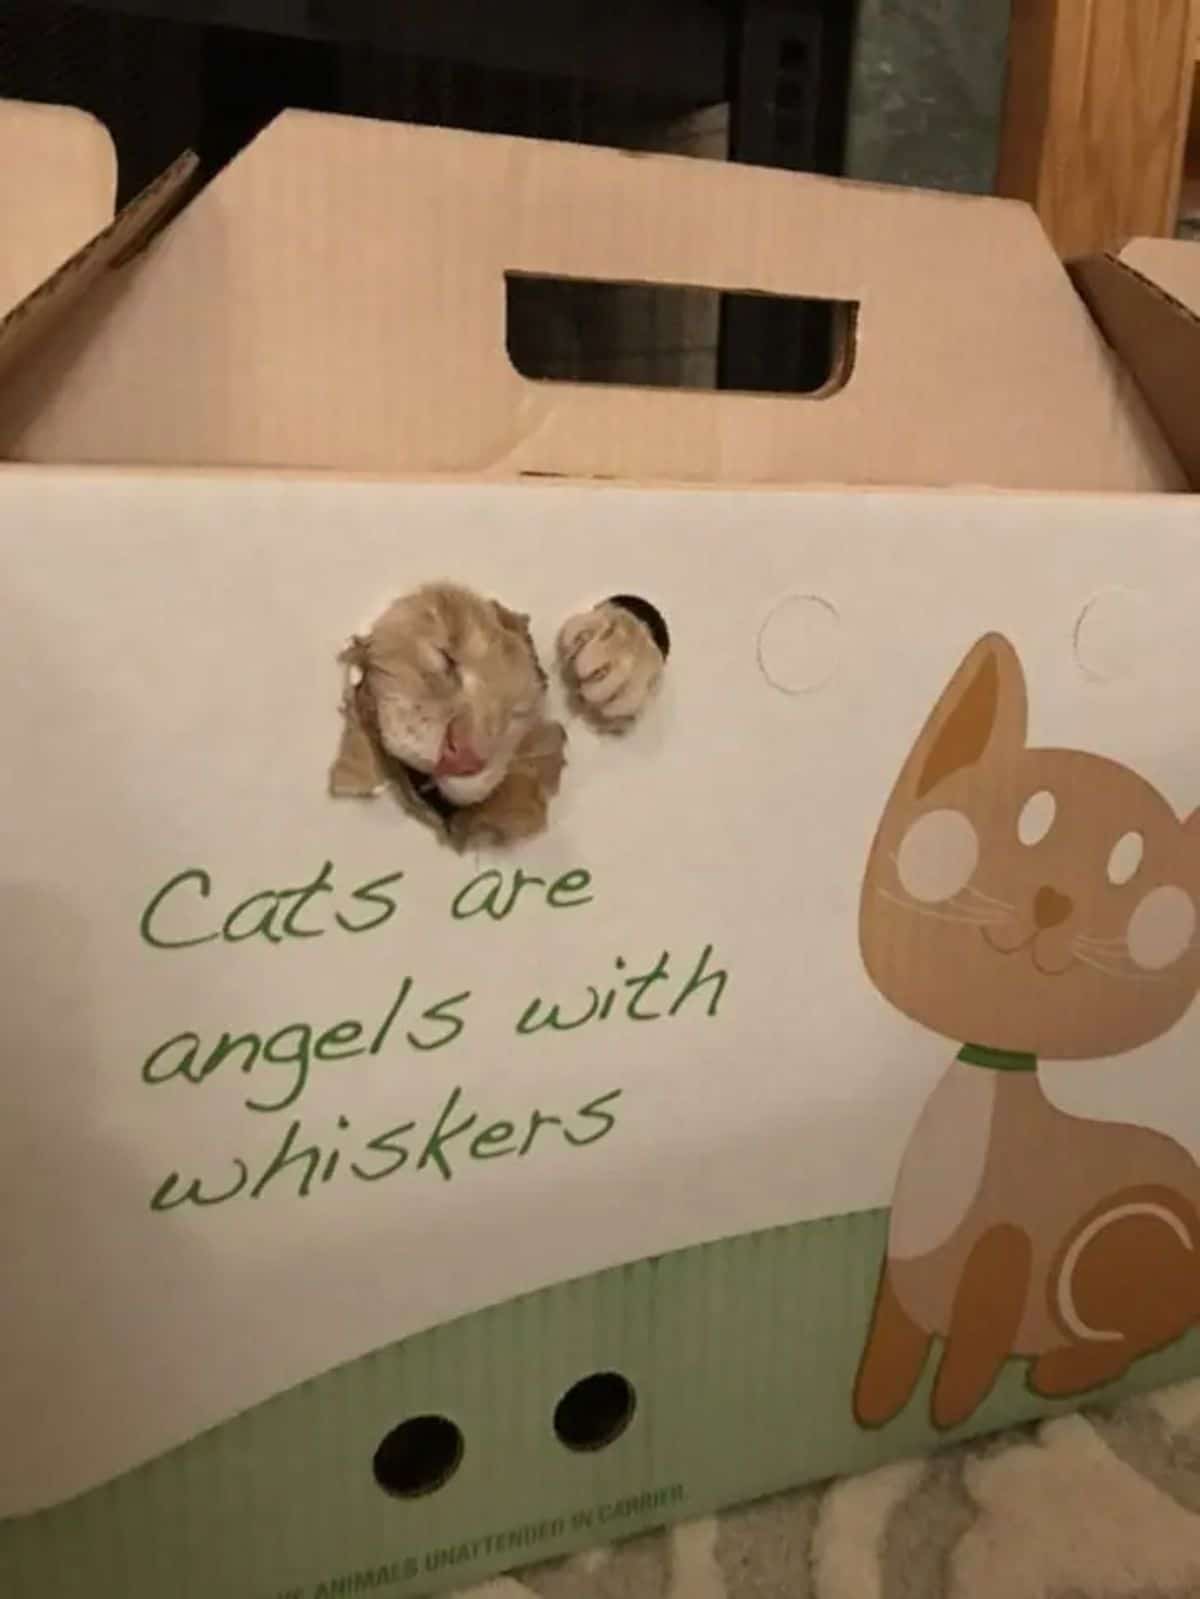 orange cat scratching and biting its way out of a cardboard box with a sign that says cats are angels with whiskers